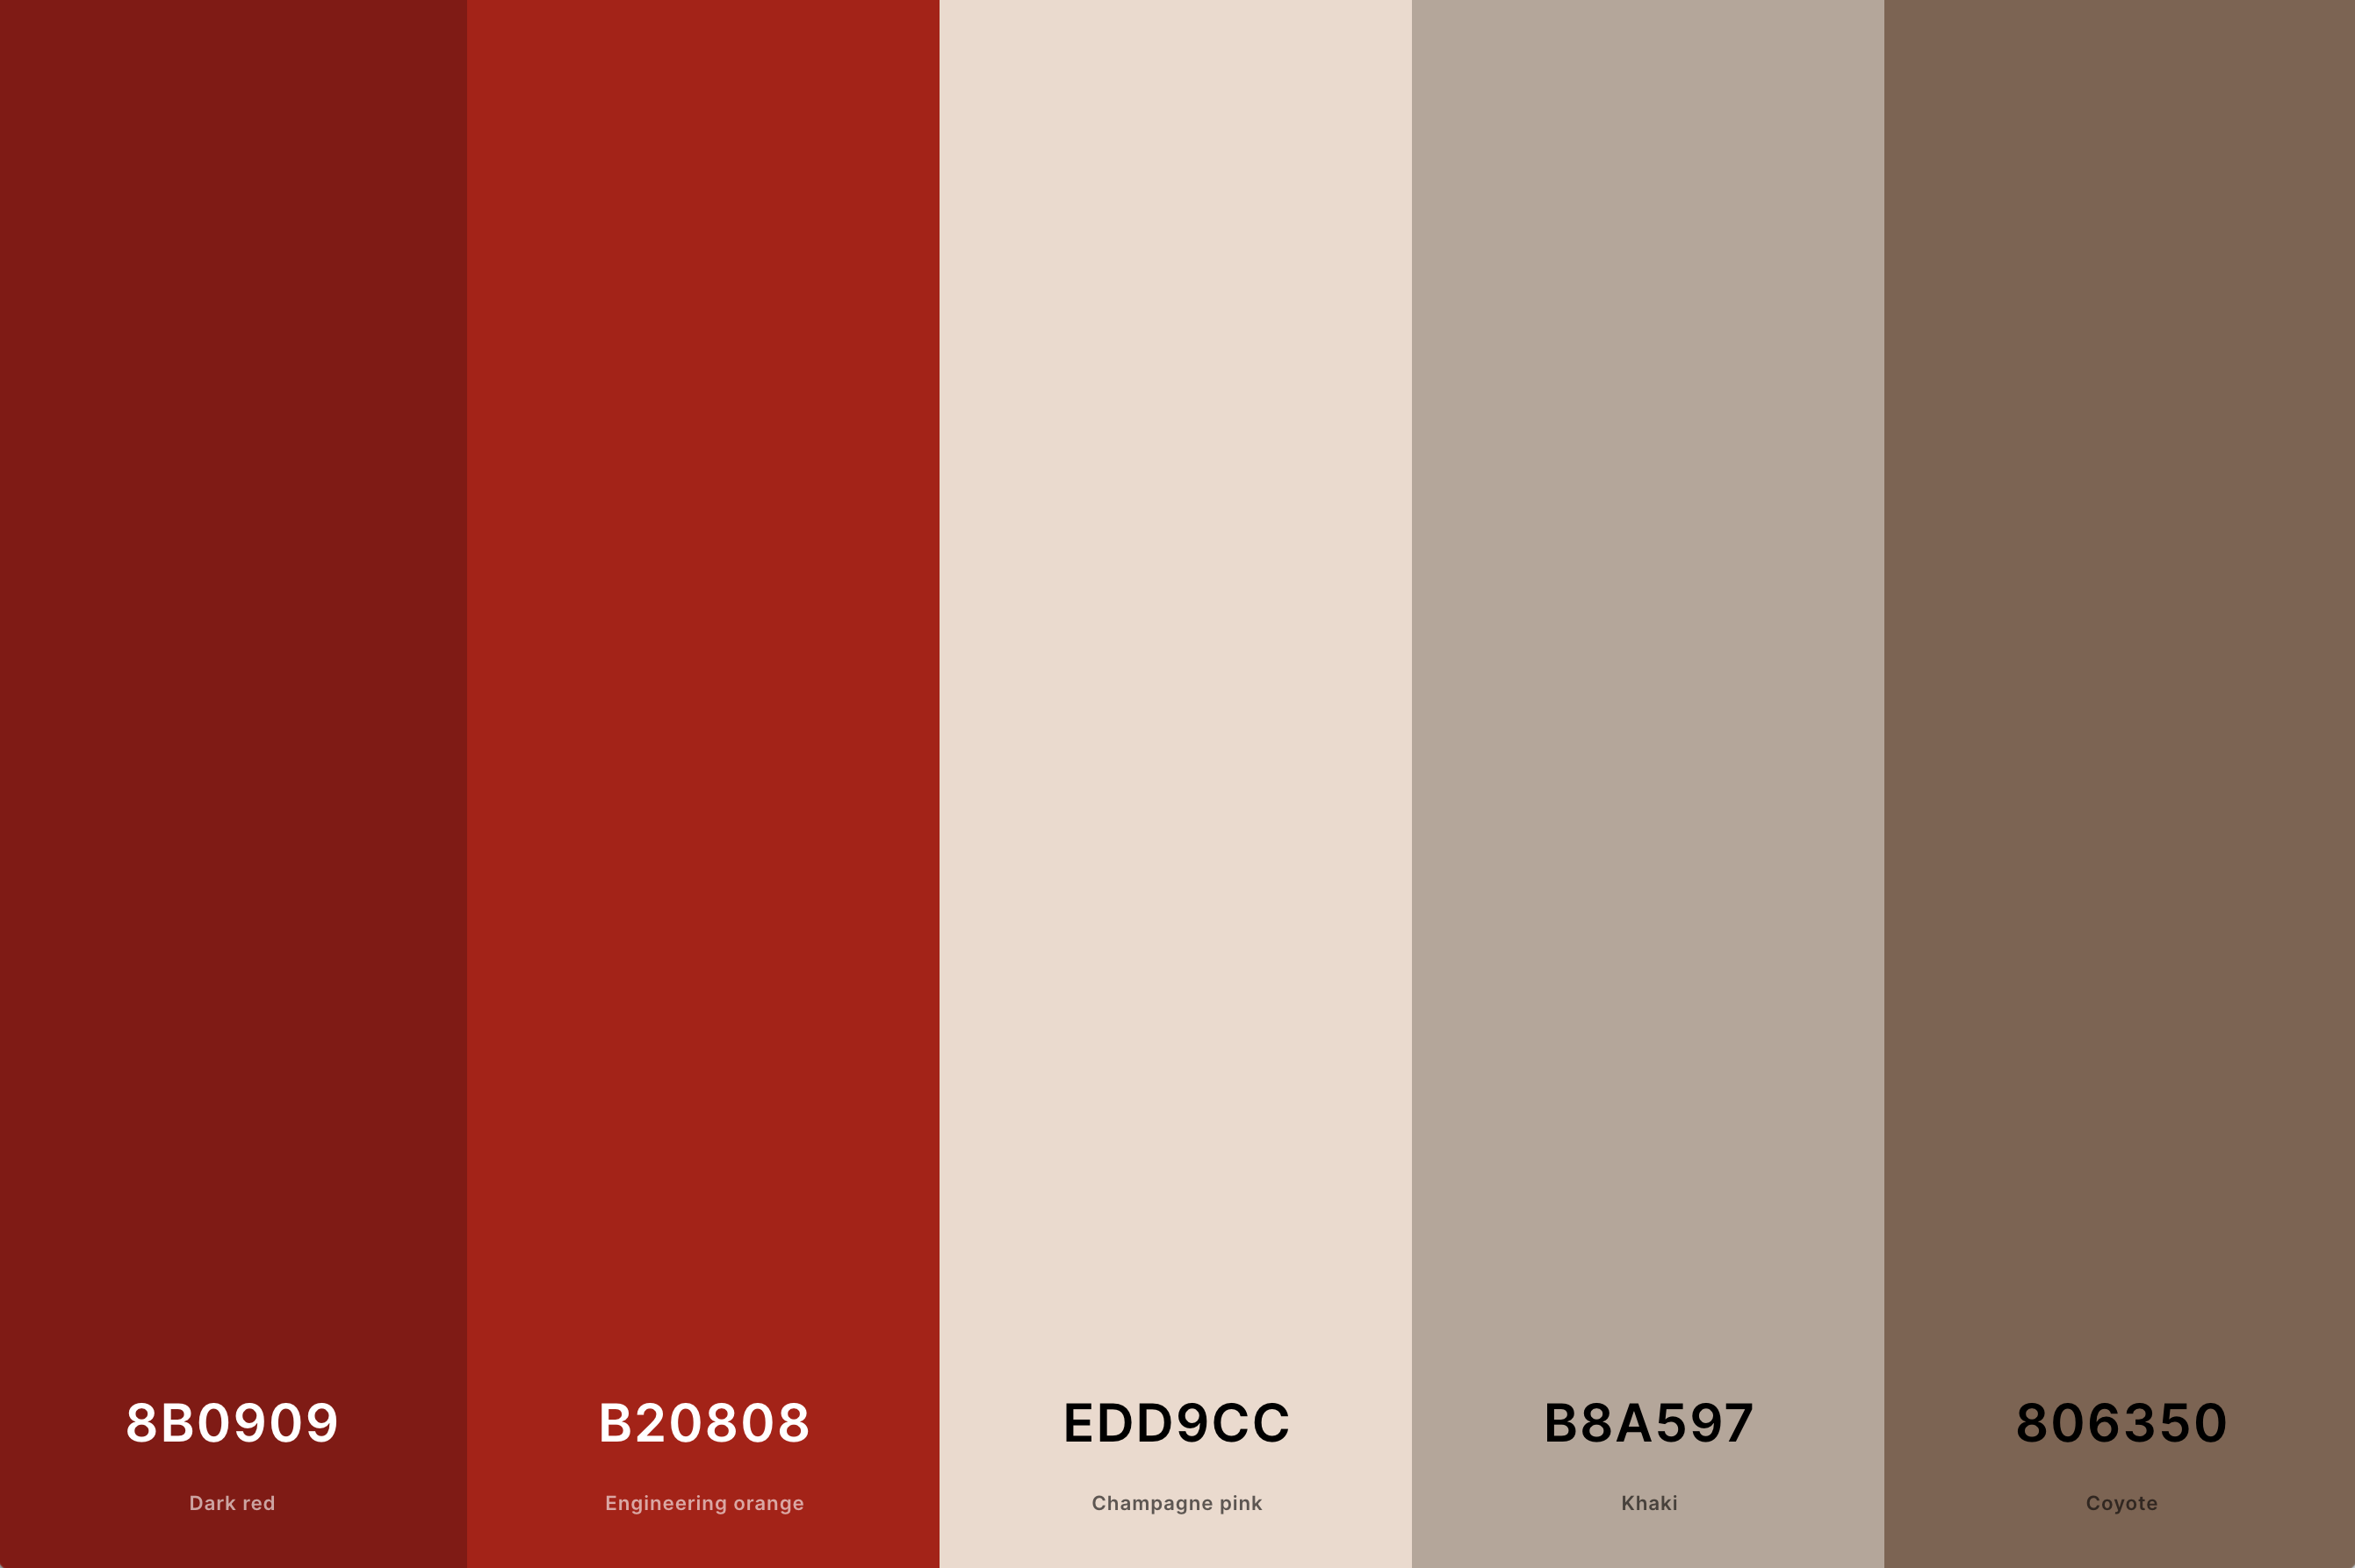 20. Red And Beige Color Palette Color Palette with Dark Red (Hex #8B0909) + Engineering Orange (Hex #B20808) + Champagne Pink (Hex #EDD9CC) + Khaki (Hex #B8A597) + Coyote (Hex #806350) Color Palette with Hex Codes